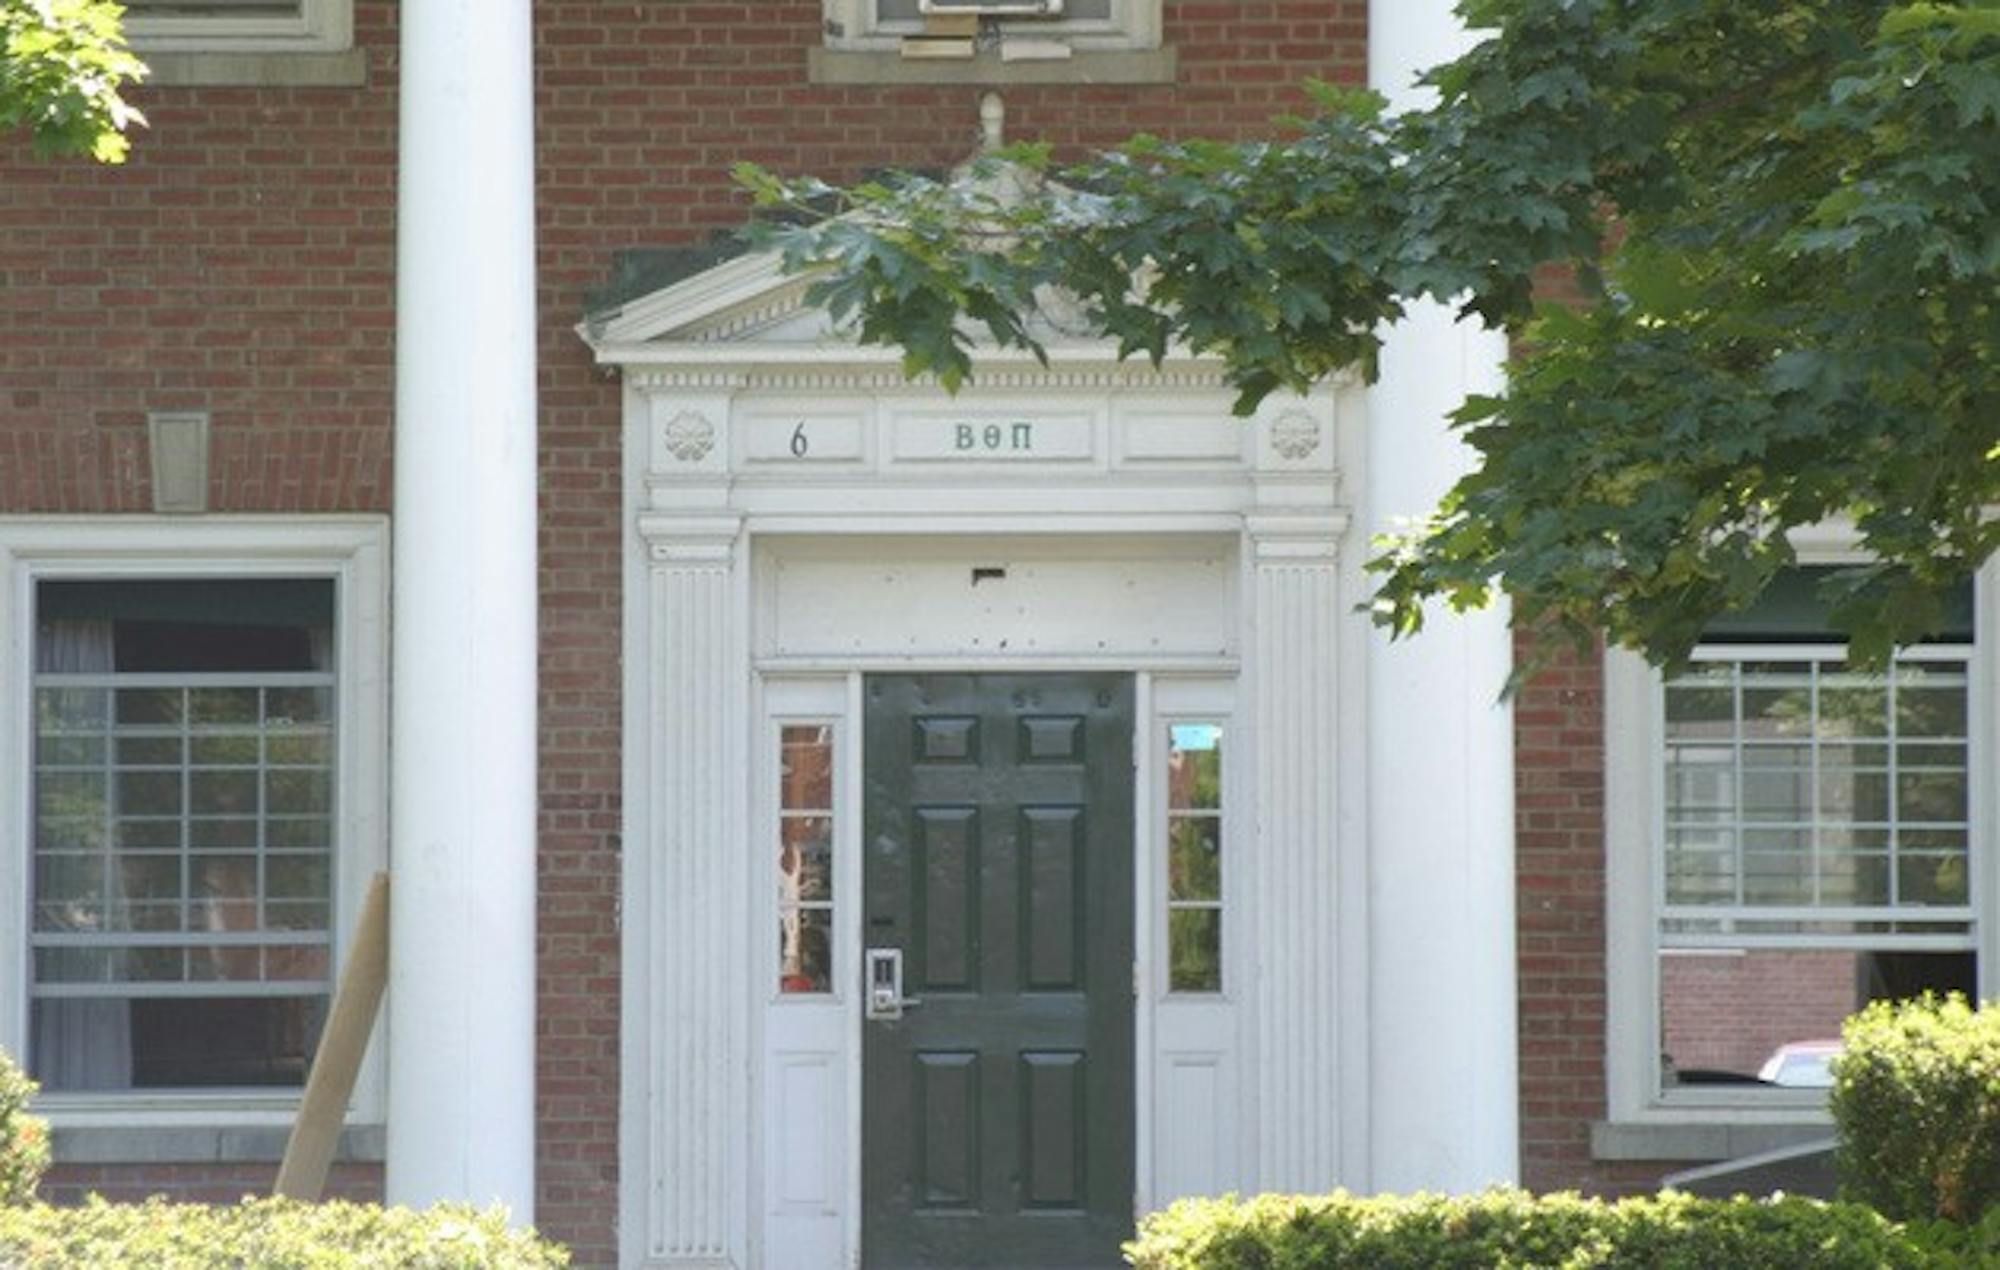 Beta Theta Pi was derecognized by the College in 1996, and its alumni are seeking to make the fraternity an official Dartmouth Greek organization once again. Alpha Xi Delta sorority currently leases its physical plant.